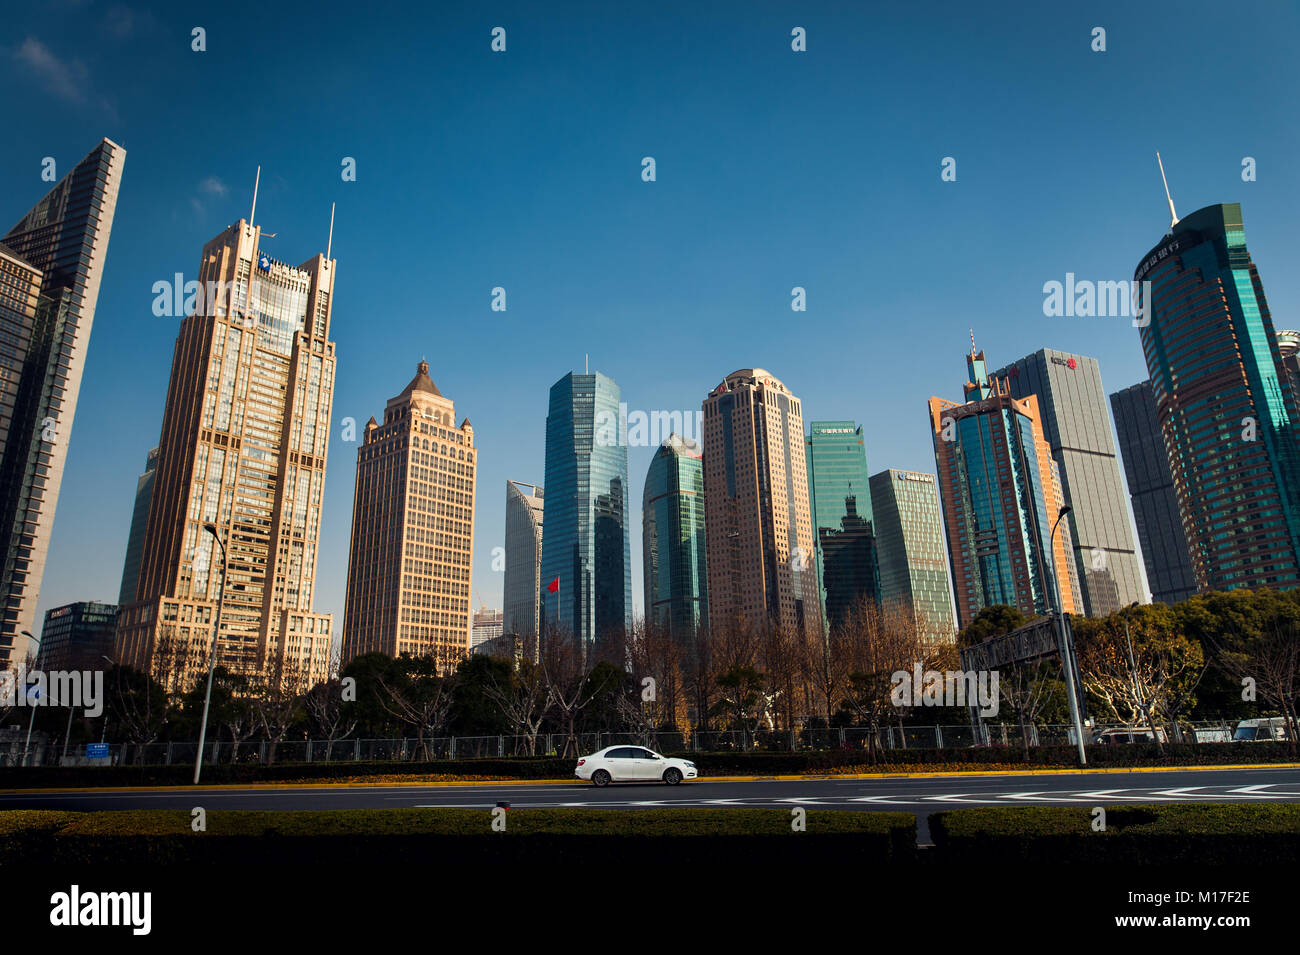 white car in front of Shanghai skyscrapers under blue sky Stock Photo